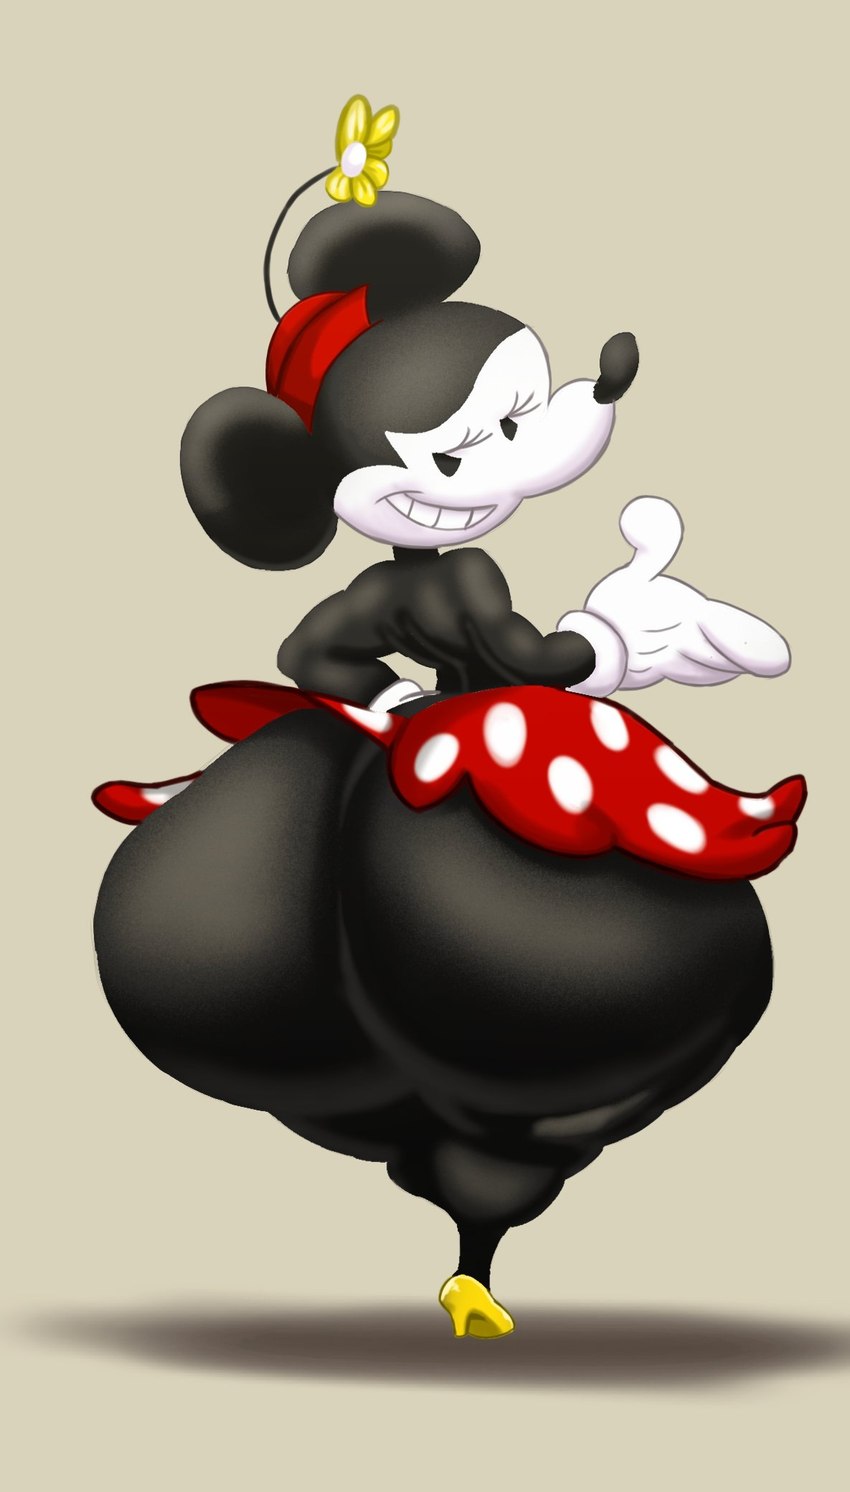 minnie mouse (disney) created by thedeathcrow05